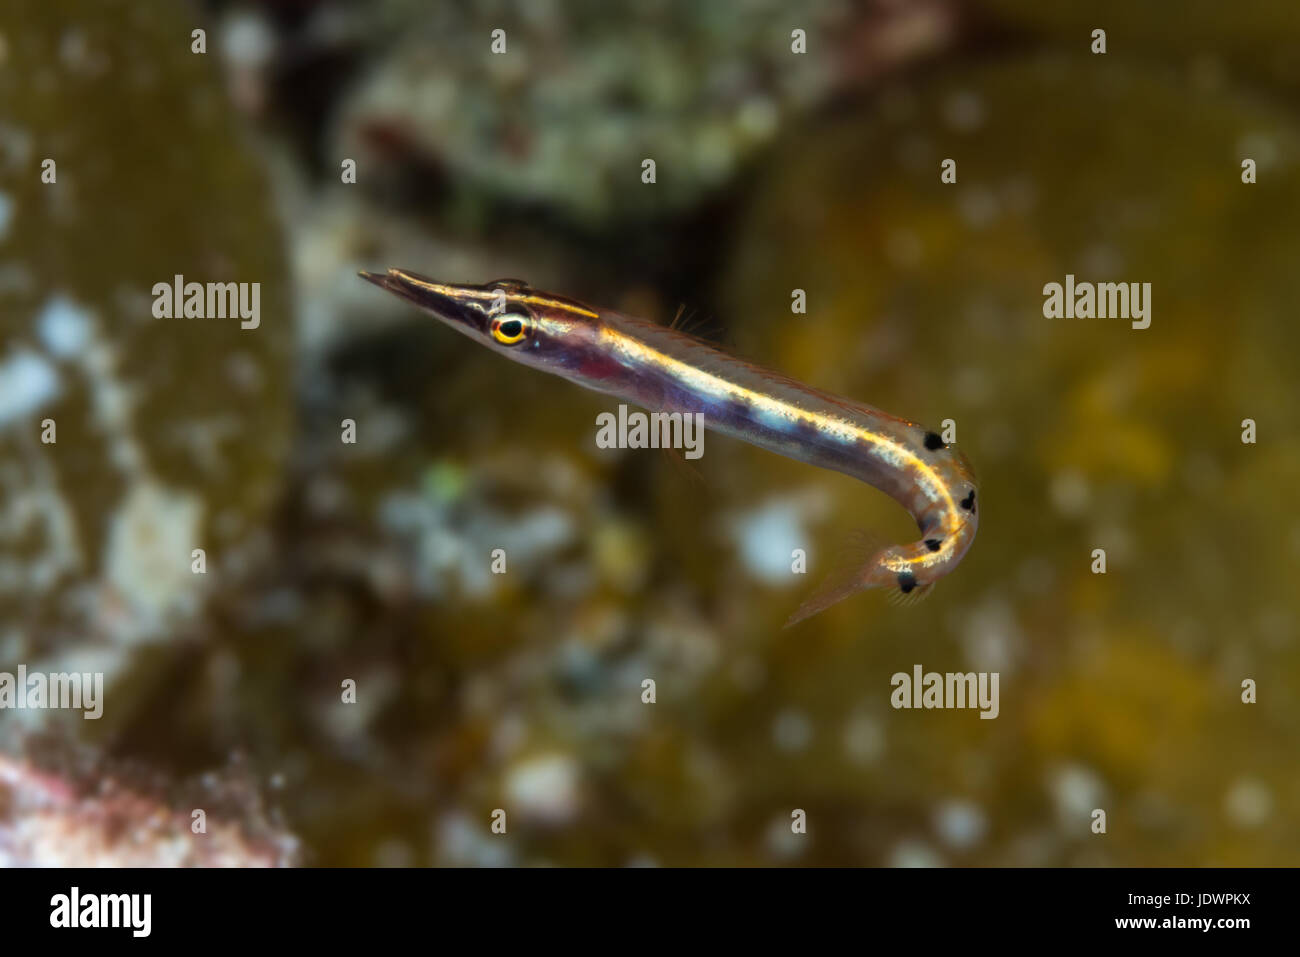 Arrow blenny (Lucayablennius zingaro) showing hooked tail, view from side, with mouth open. Bahamas, December Stock Photo